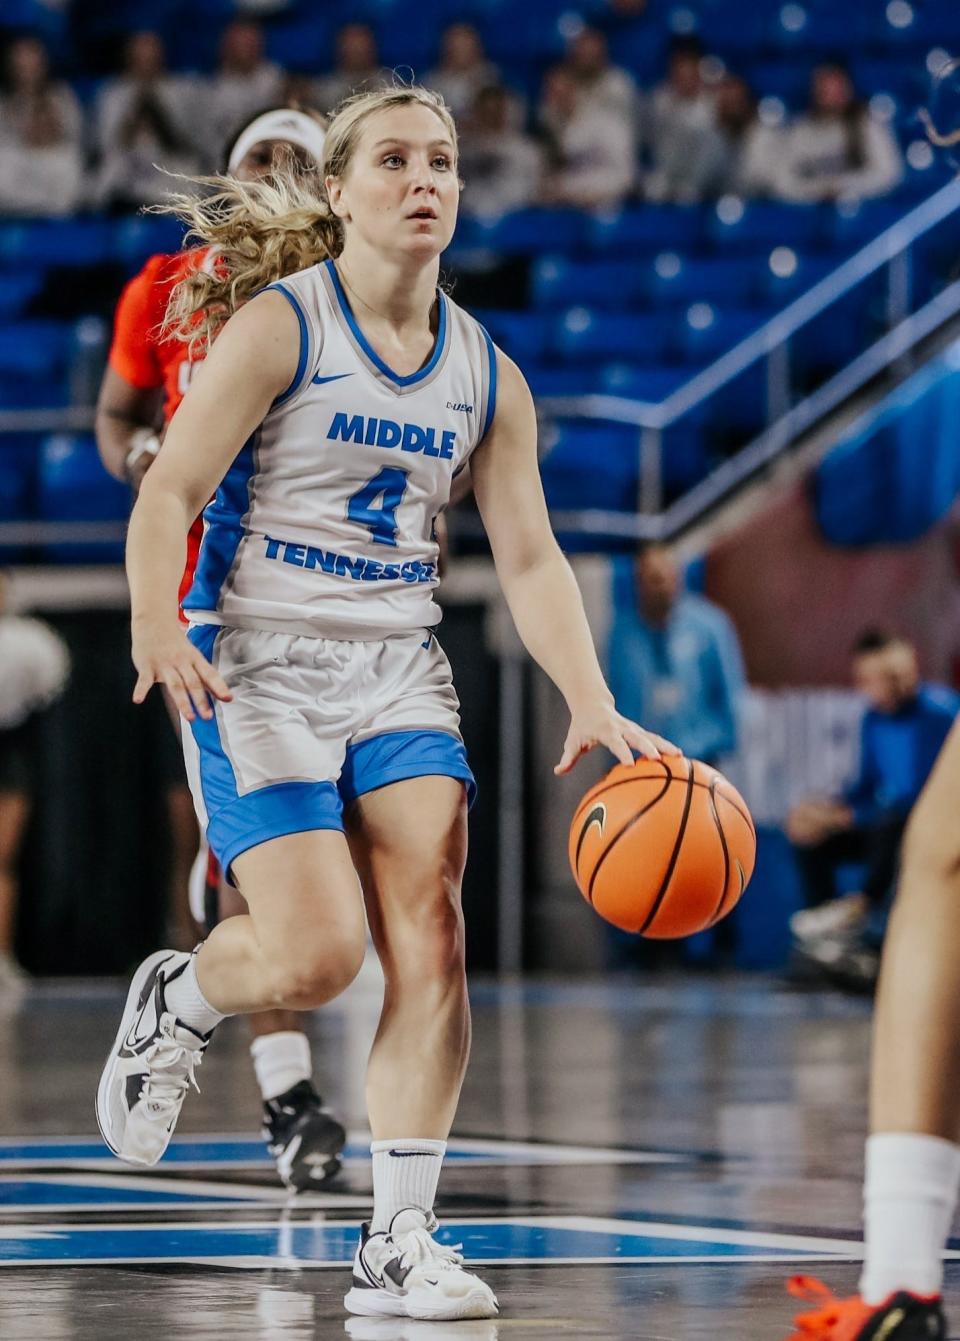 Middle Tennessee State's Savanah Wheeler was named the Conference USA player of the week after the Lady Raiders beat nationally-ranked Louisville.